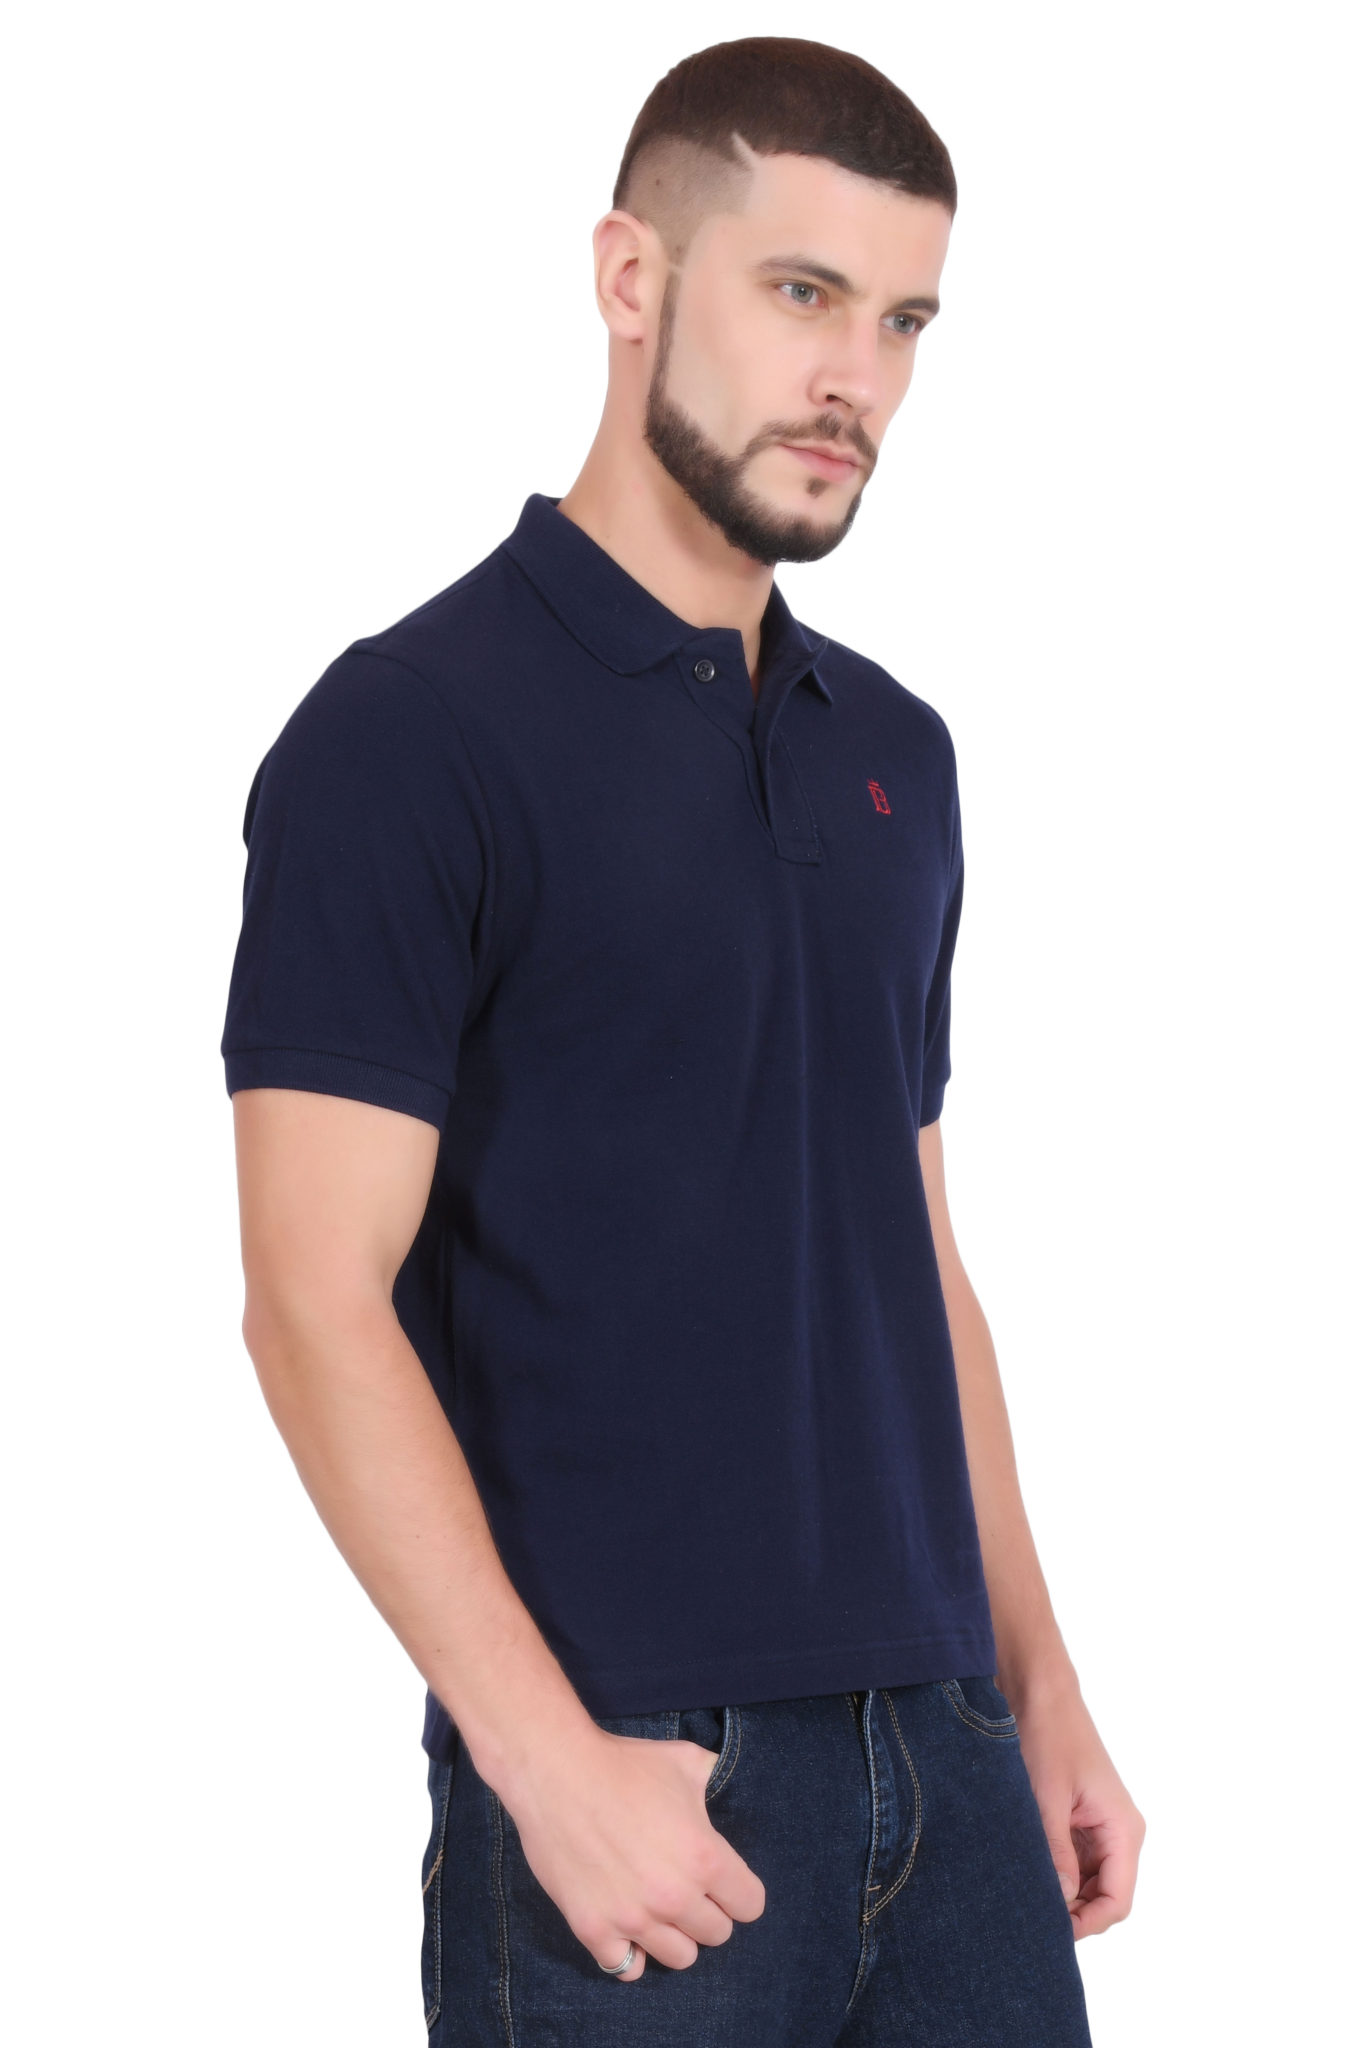 Cotton Polo T Shirt For Men. Plain Solid Design With Collar Navy Blue Right 2 